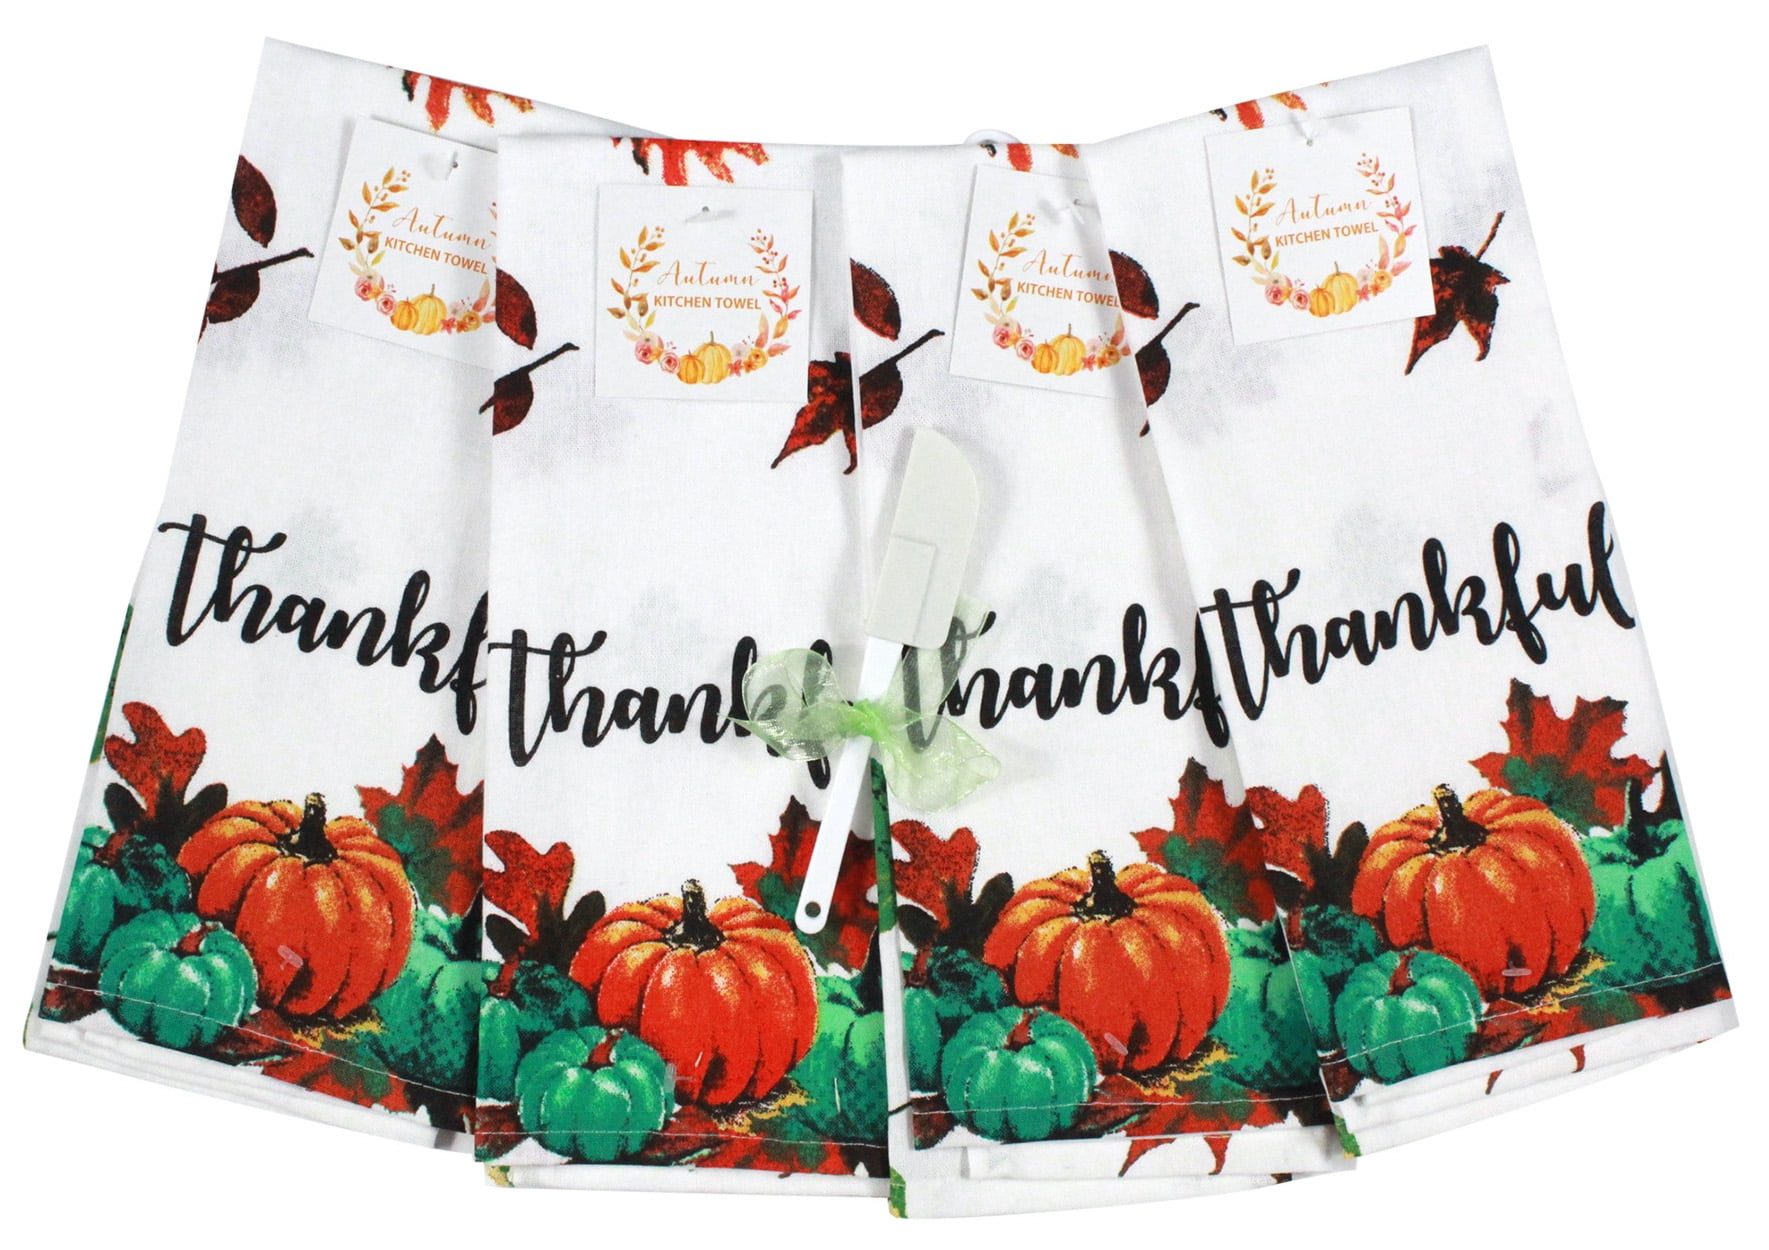 Fall Harvest Thanksgiving Kitchen Towels and Oven Mitts Bundle of 4 Items Teal and White Pumpkins - Green Leaves 2 Dish Towels and 2 Oven Mitts